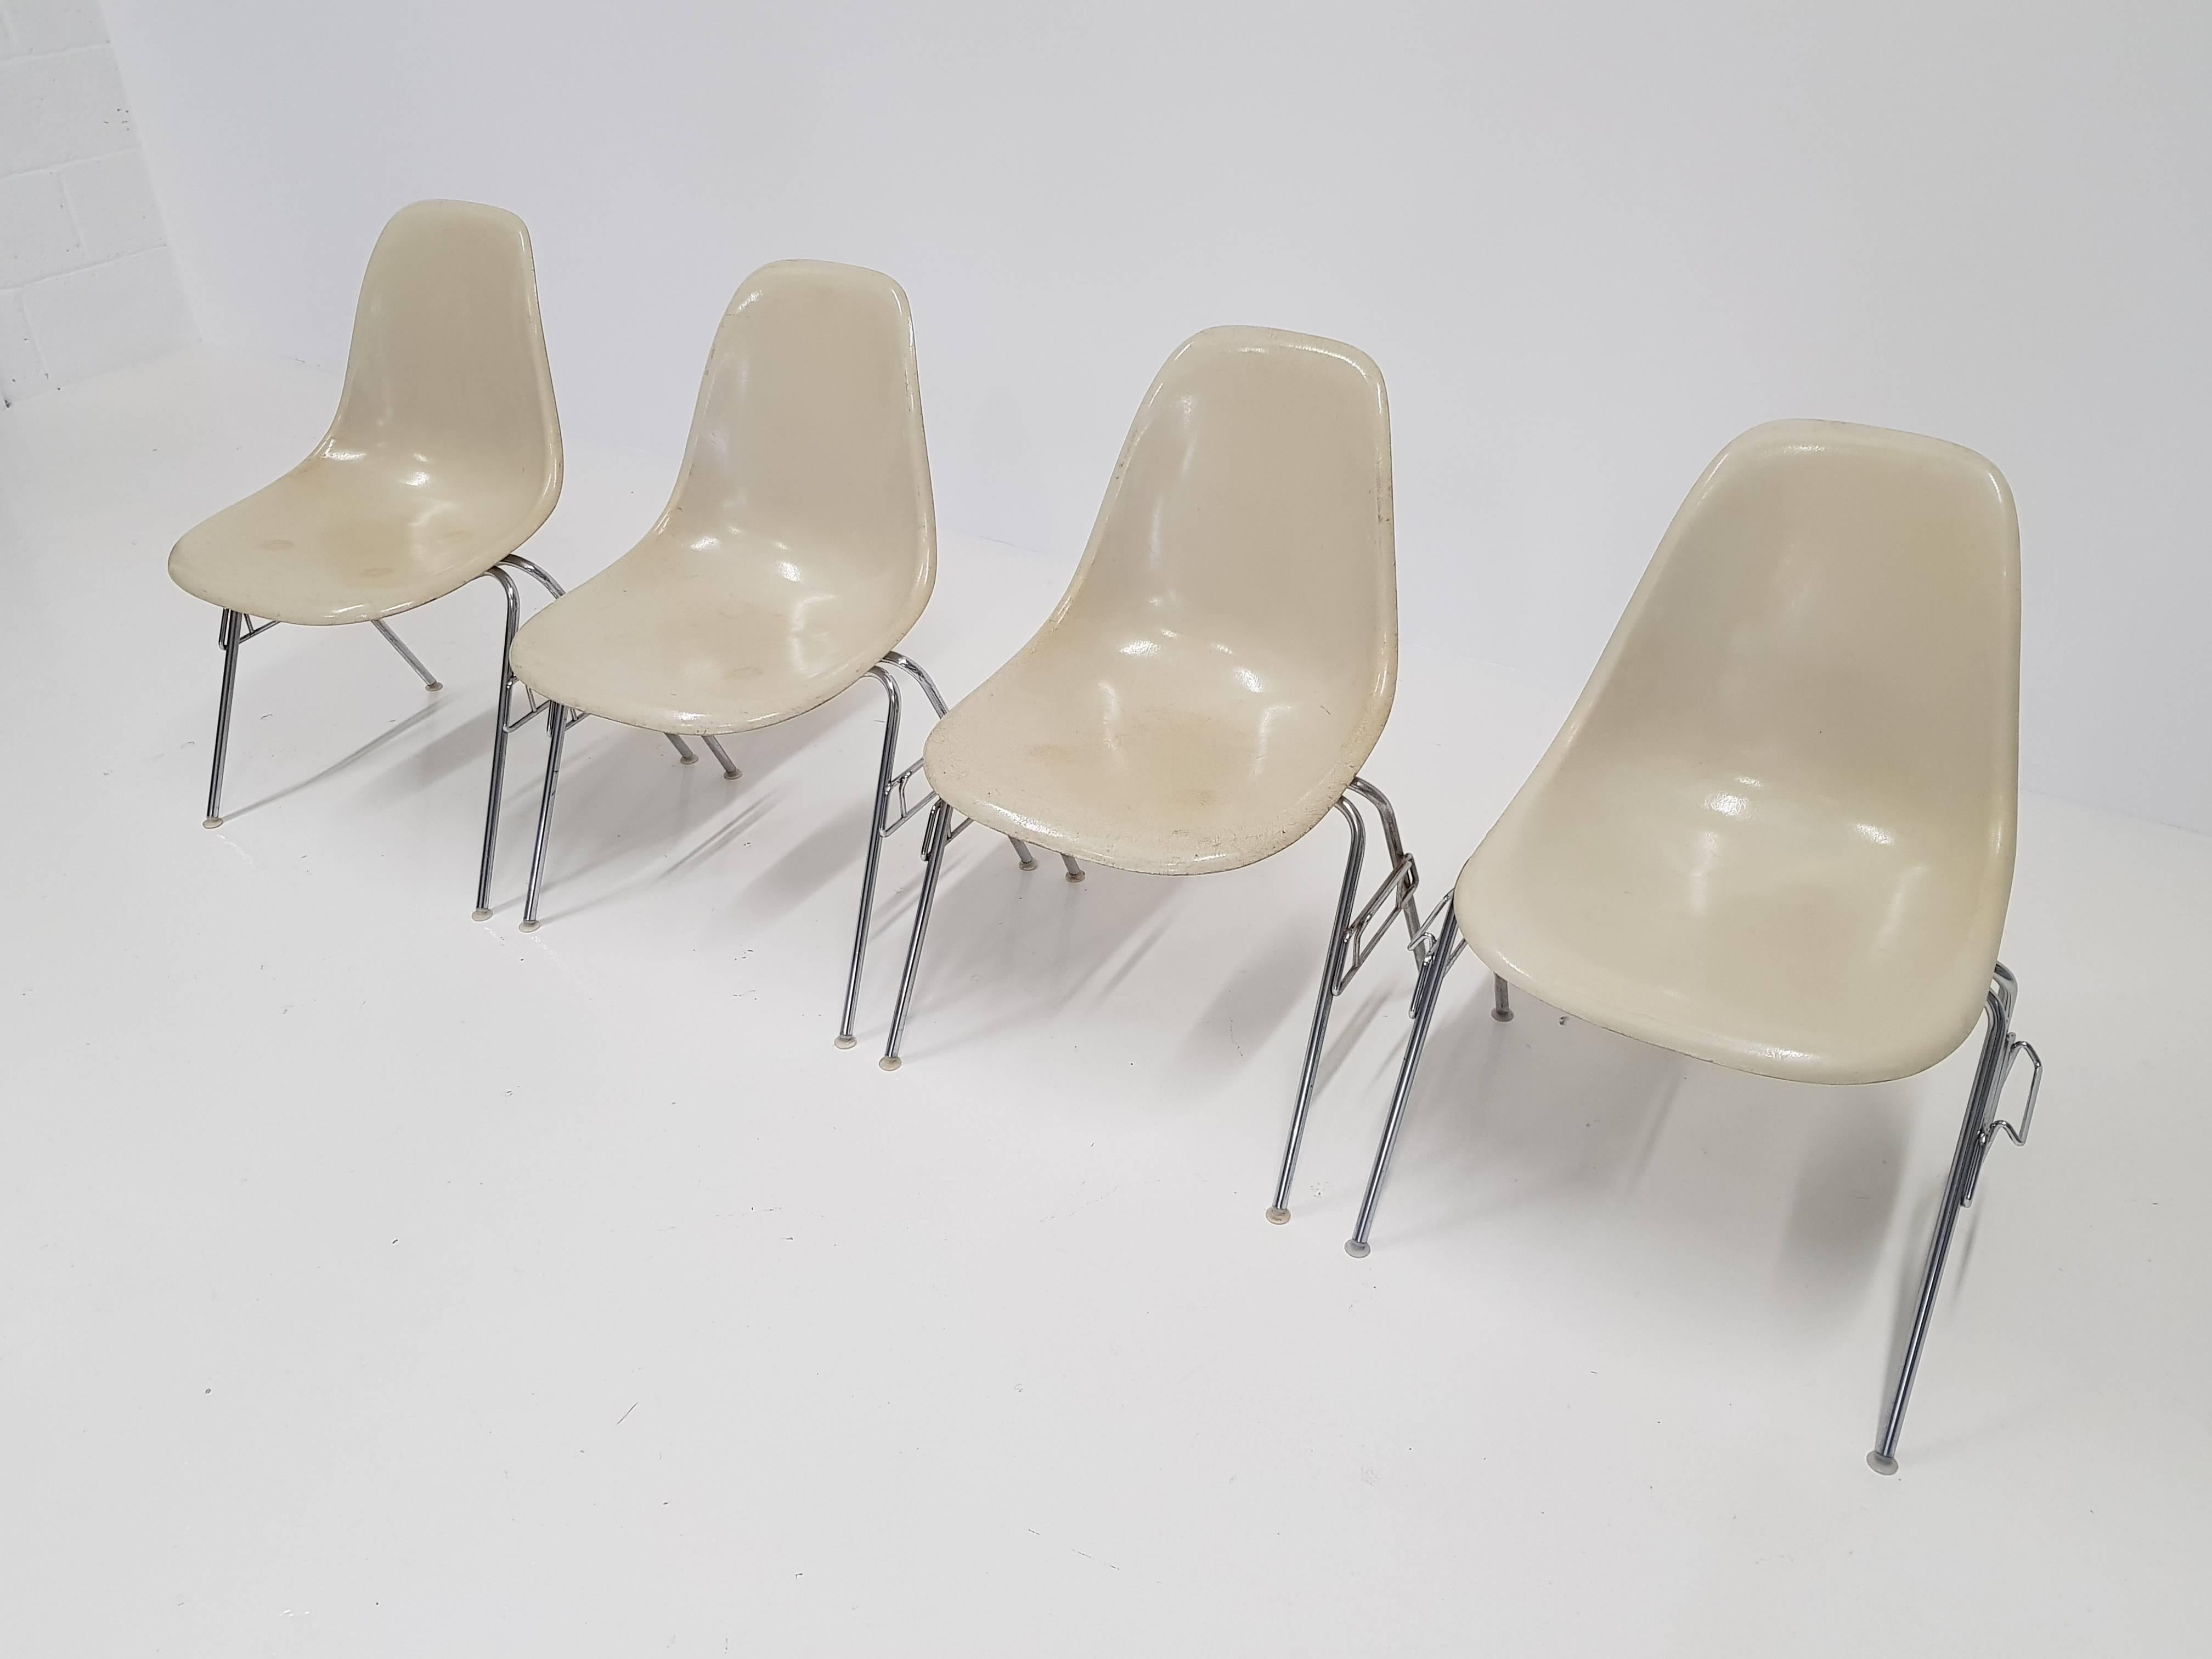 20th Century Original Parchment Charles & Ray Eames Fibreglass DSS Chairs for Herman Miller